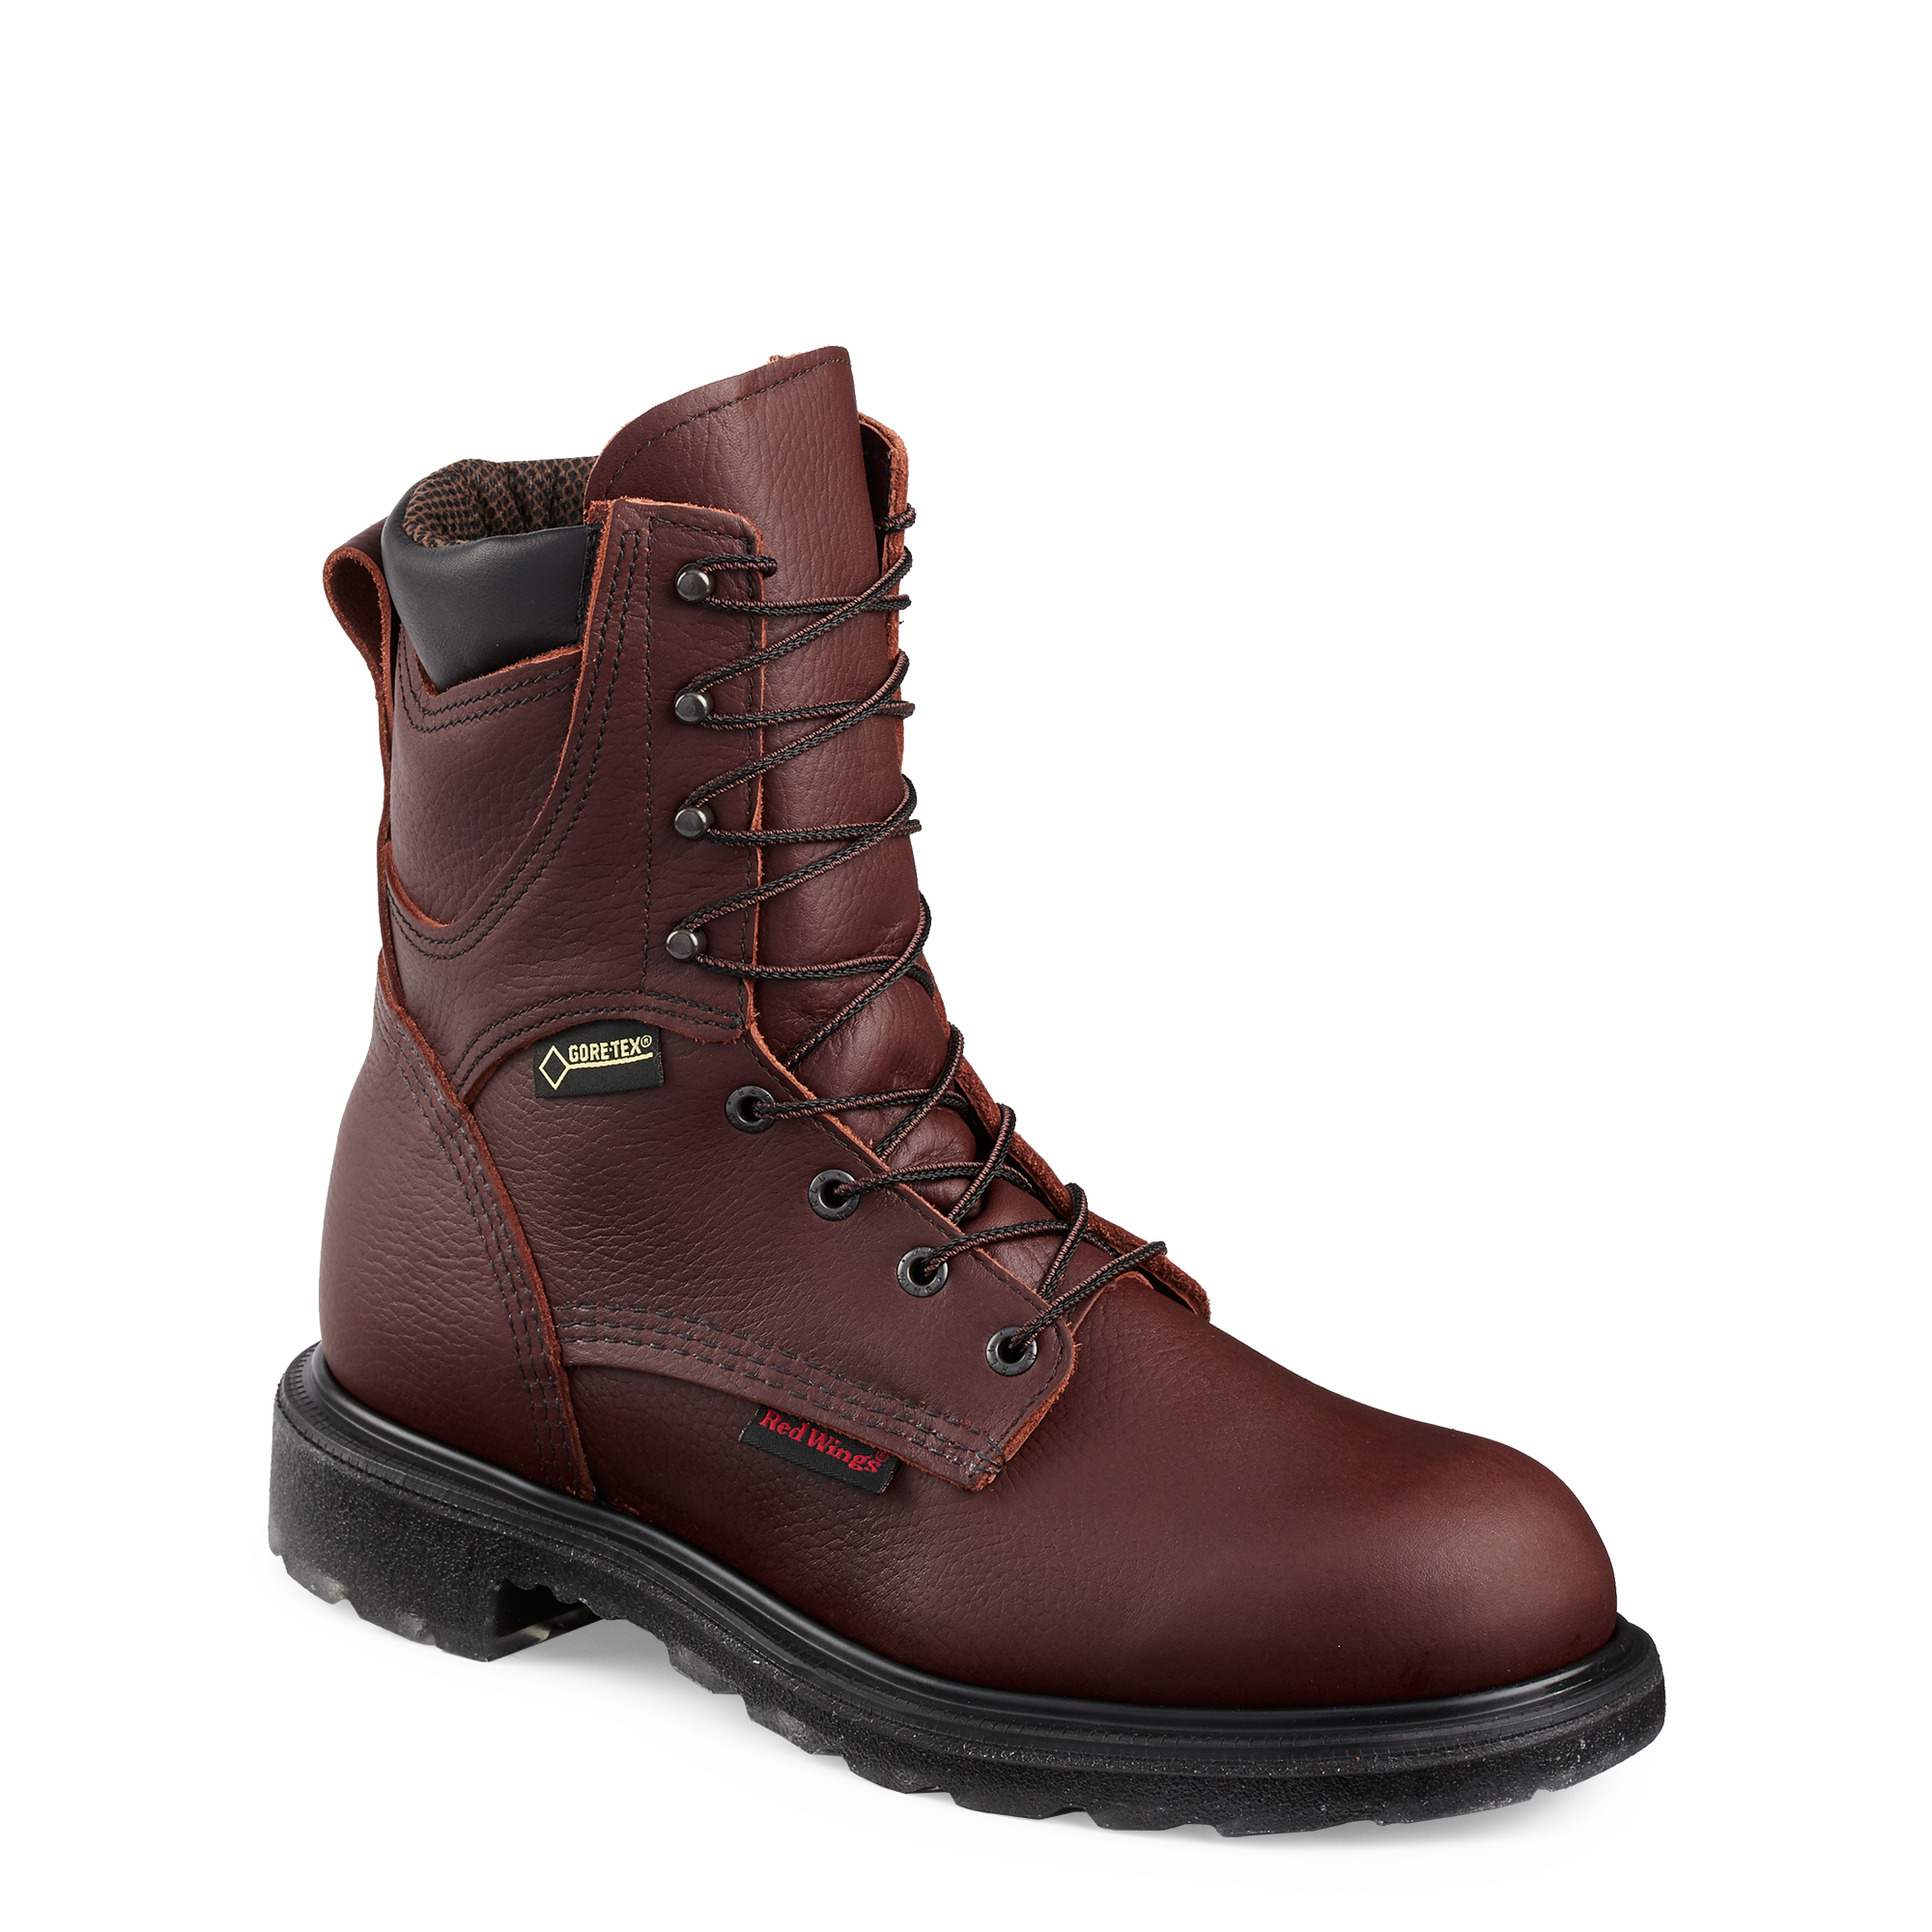 Red Wing Boots - Super Sole 11 Safety Toe Pull On